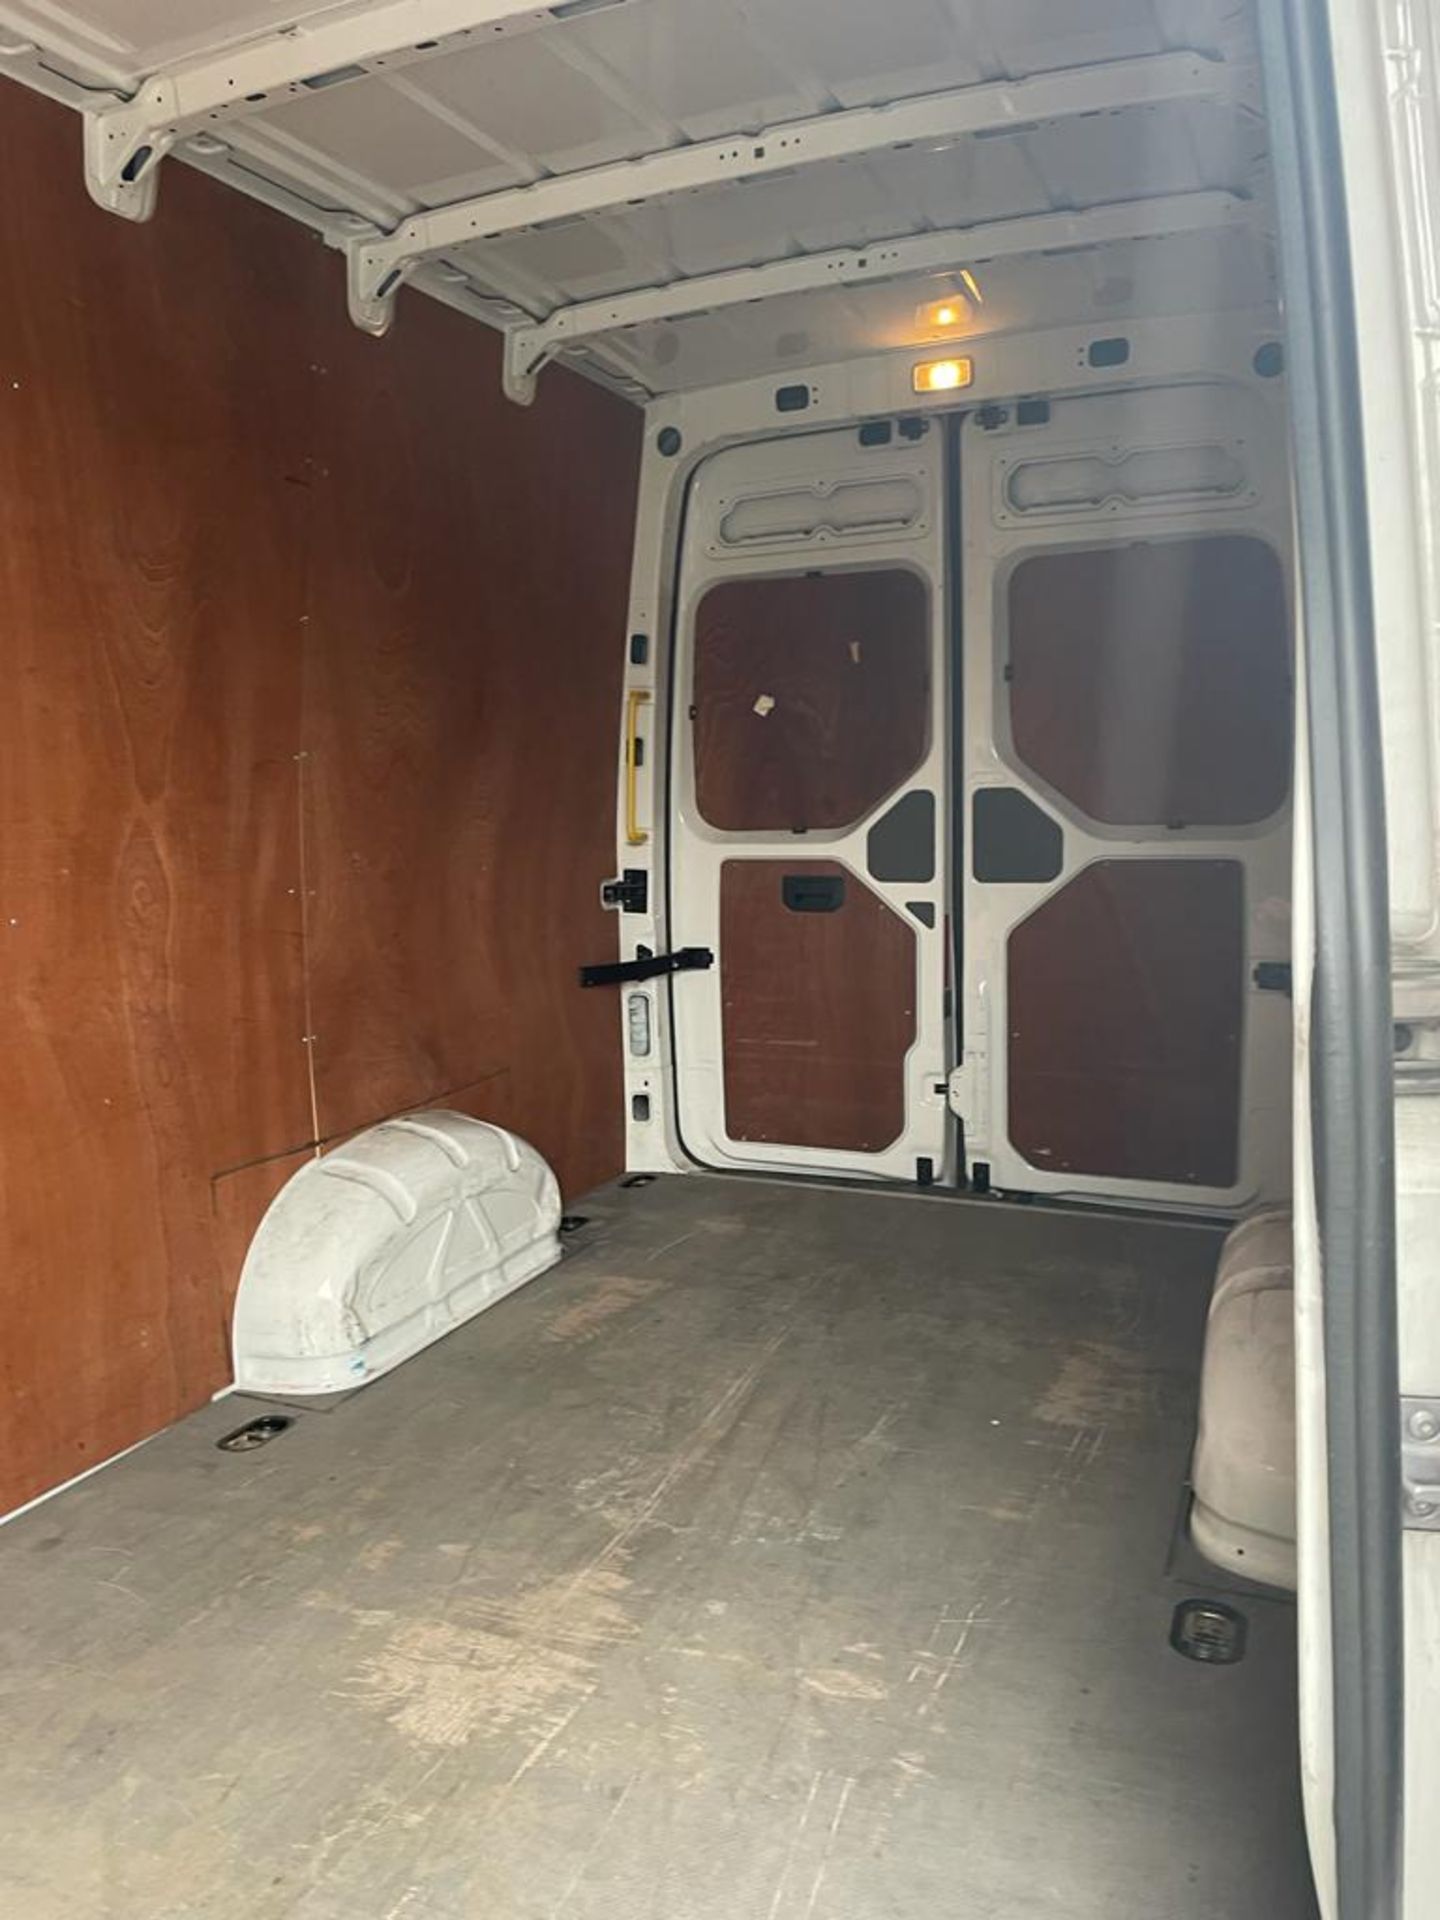 2019 Volkswagen Crafter CR35 TDI Blue Motion - Euro 6 ULEZ Compliant - Image 7 of 8